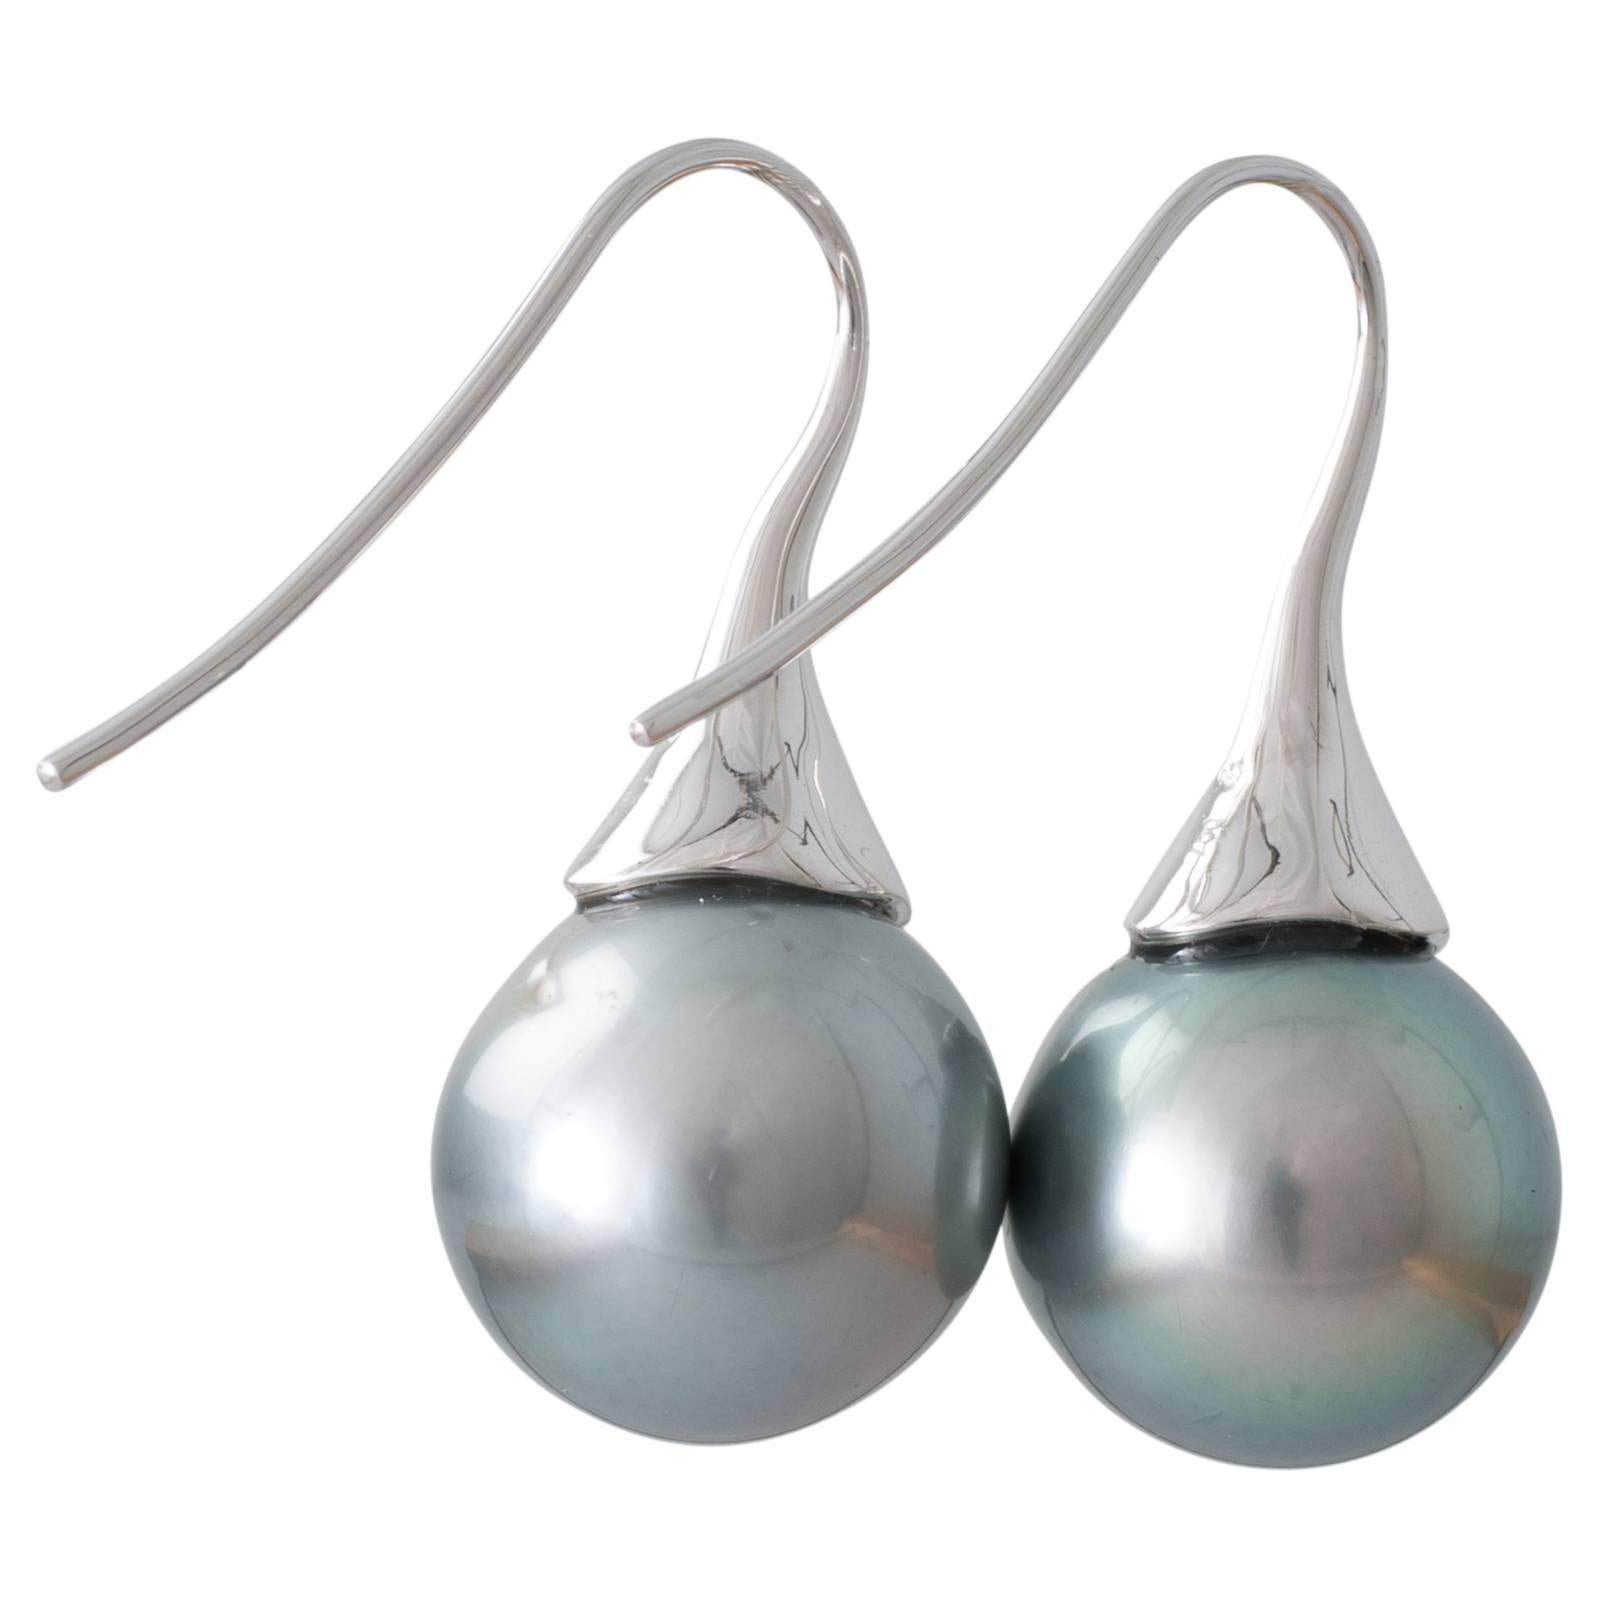 A pair of round green grey Tahitian pearl tulip hook earrings in 18ct white gold with pearls measuring 14.1 - 14.7mm with a good lustre and some natural surface marks.